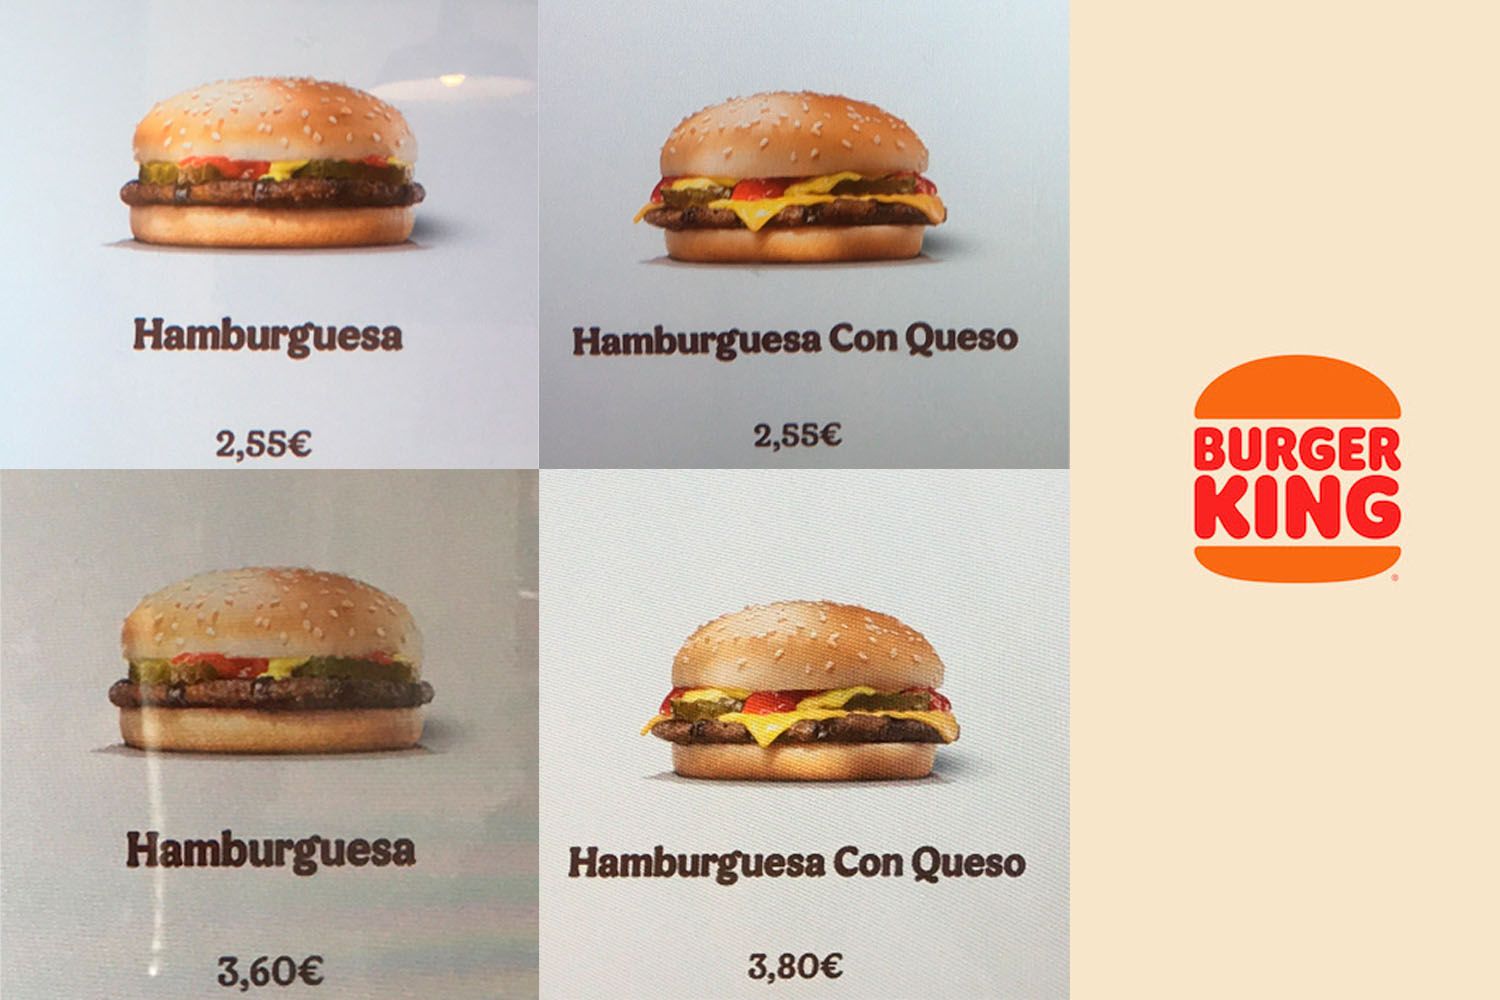 Pay almost twice as much for the same hamburger at a Burger King / CG